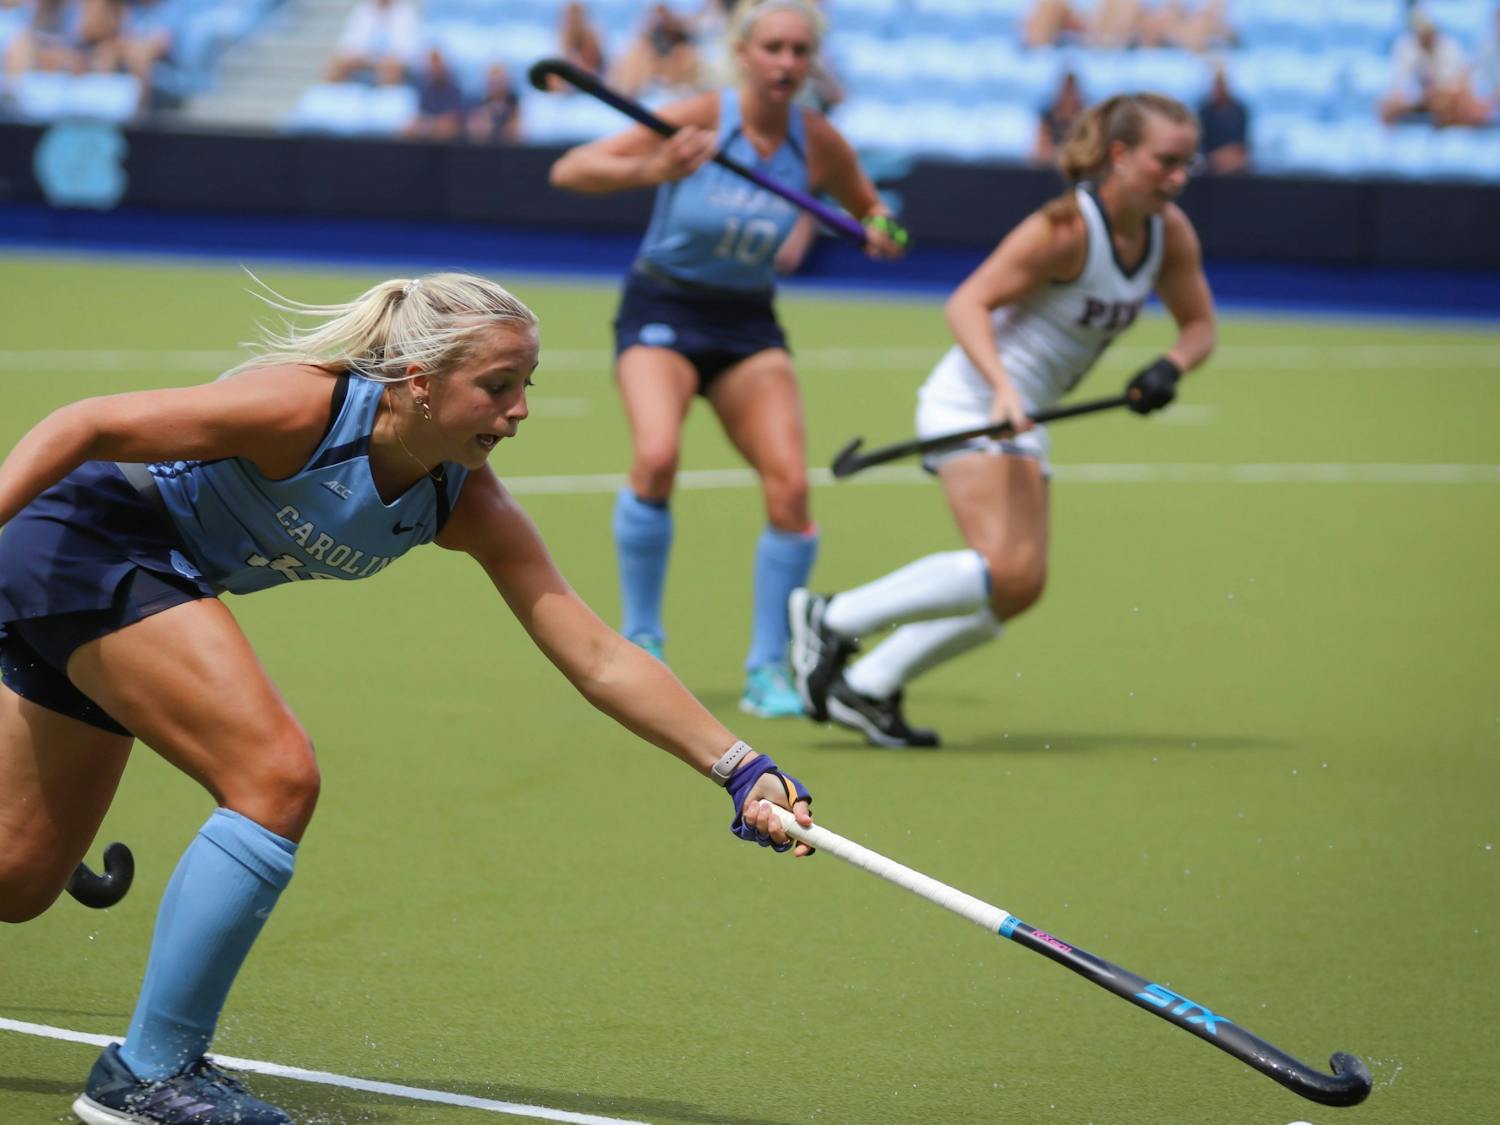 First-year midfielder Ryleigh Heck (12) sprints to prevent an interception from UPenn. UNC beat UPenn at home 4-0 on Sunday, Sept. 4, 2022.